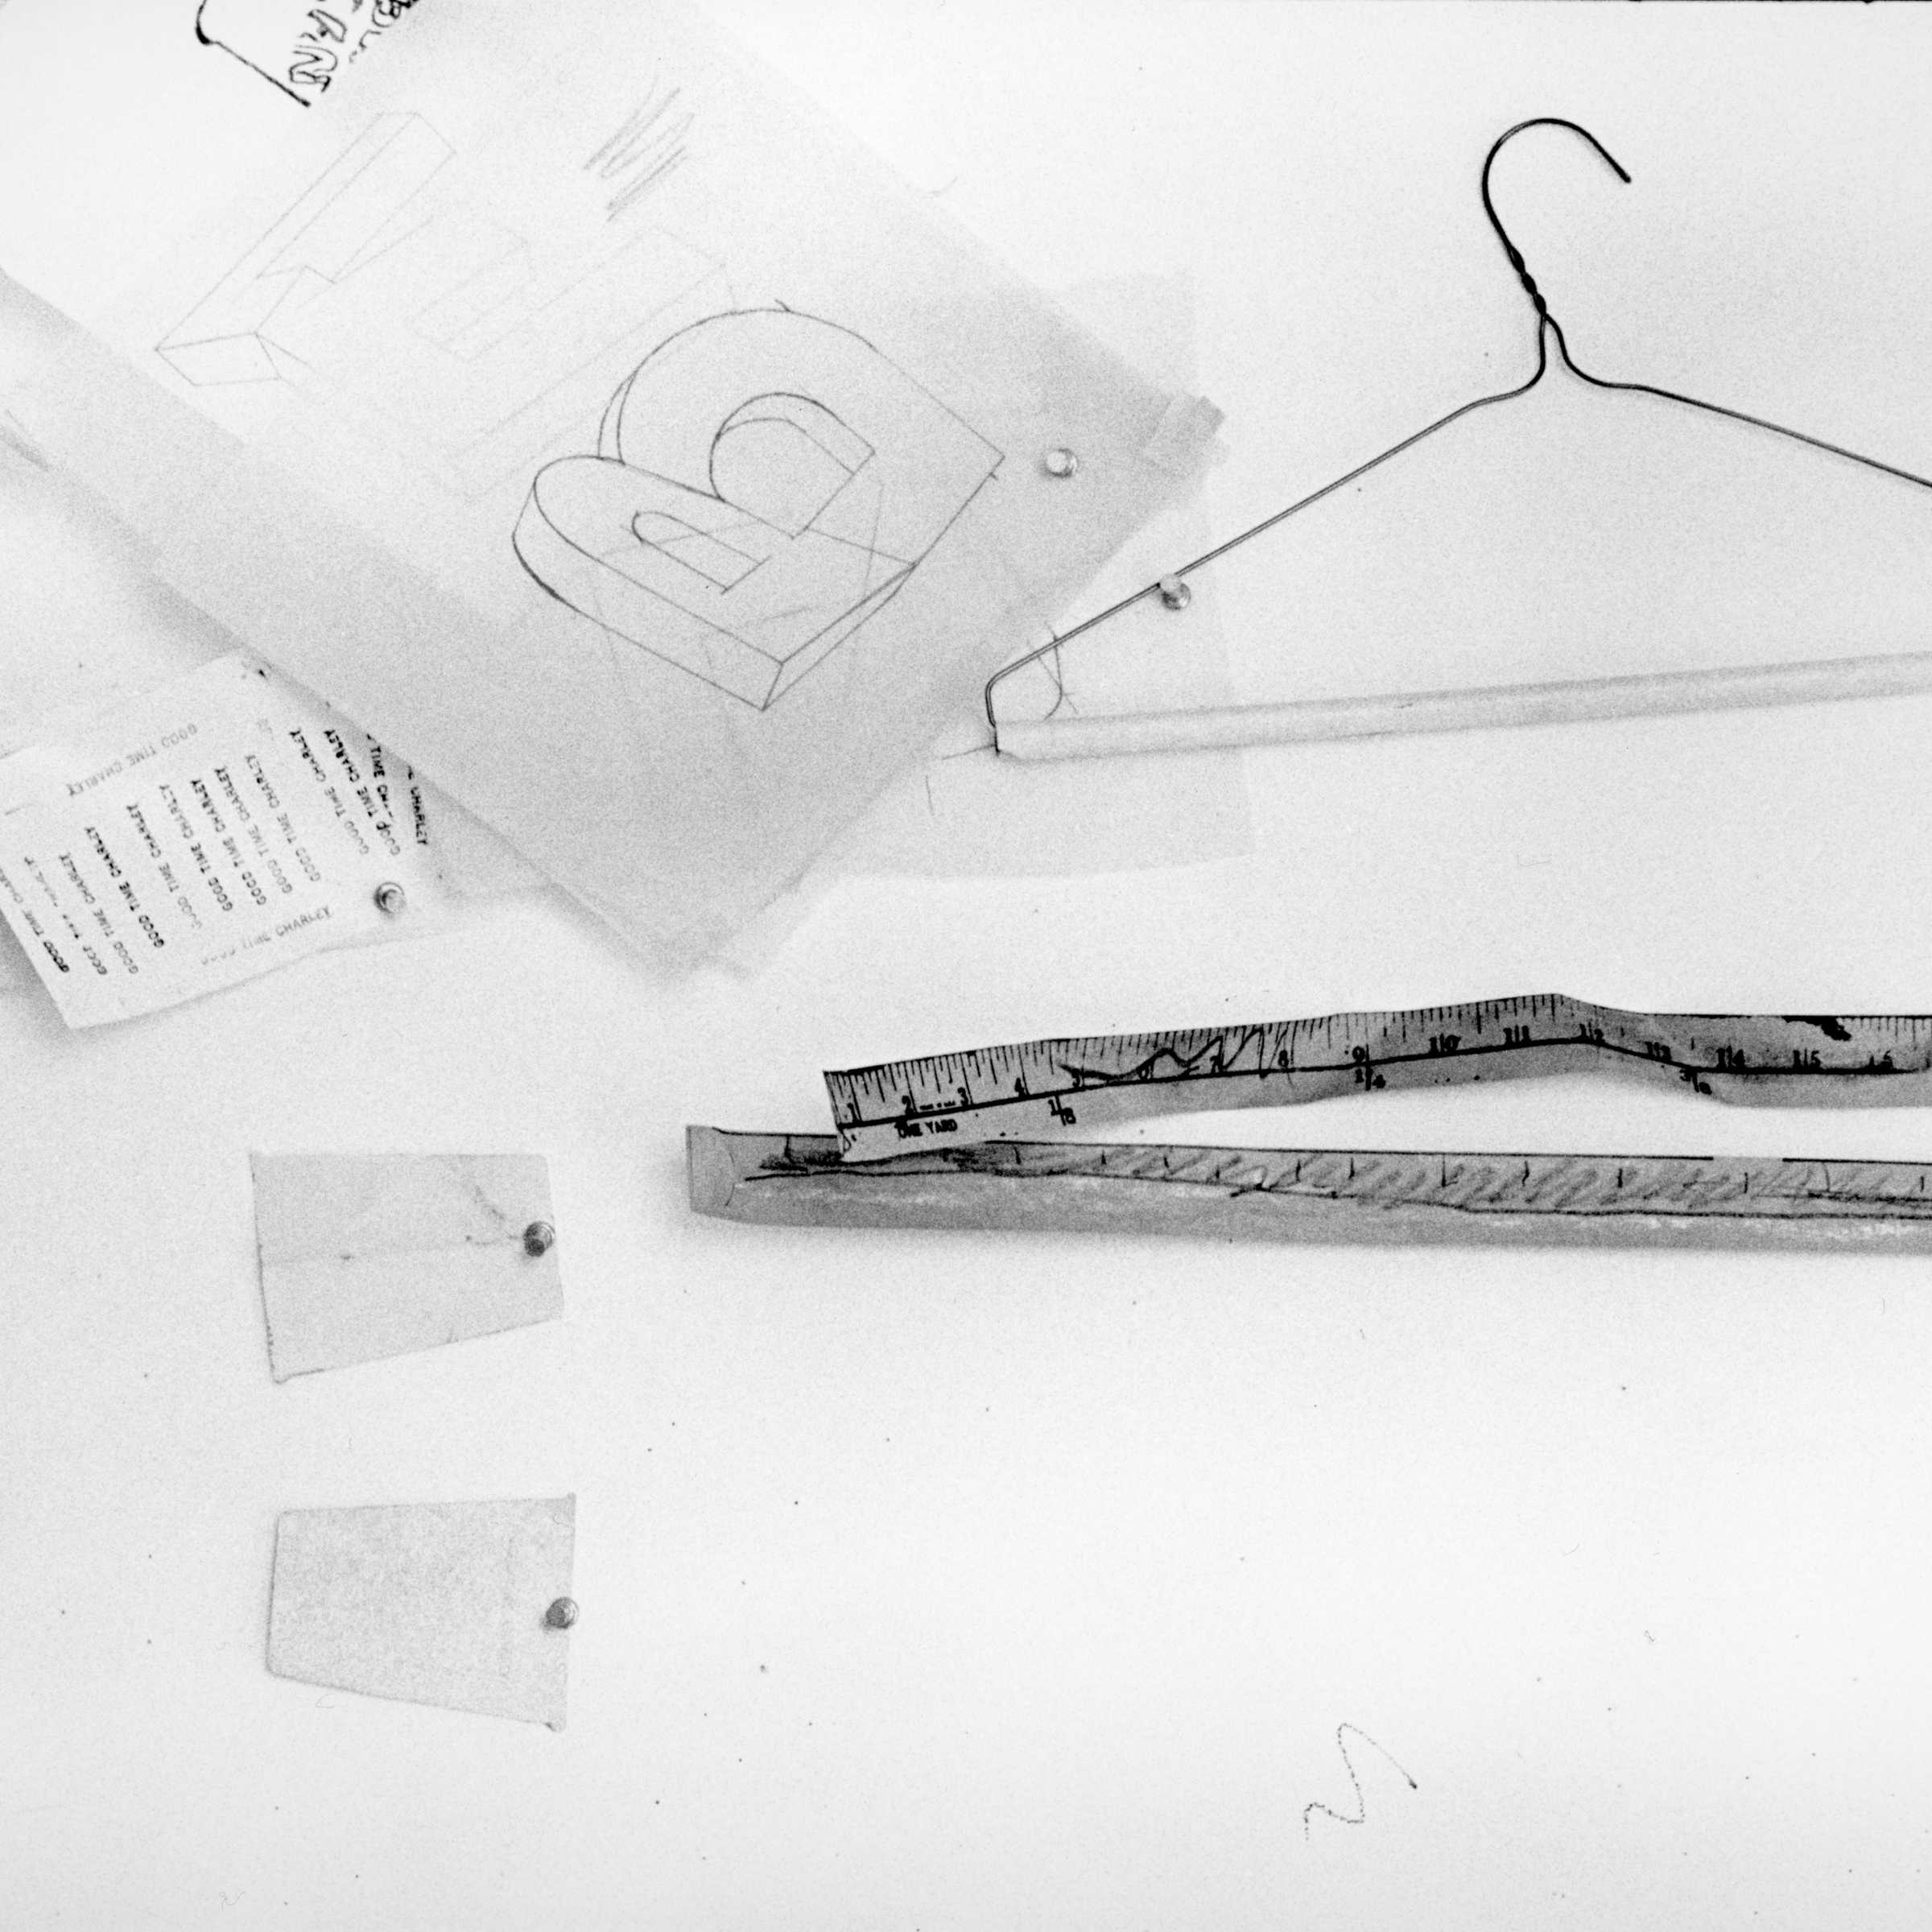 A coat hanger and some fragments of sketches for artworks pinned to a cork board